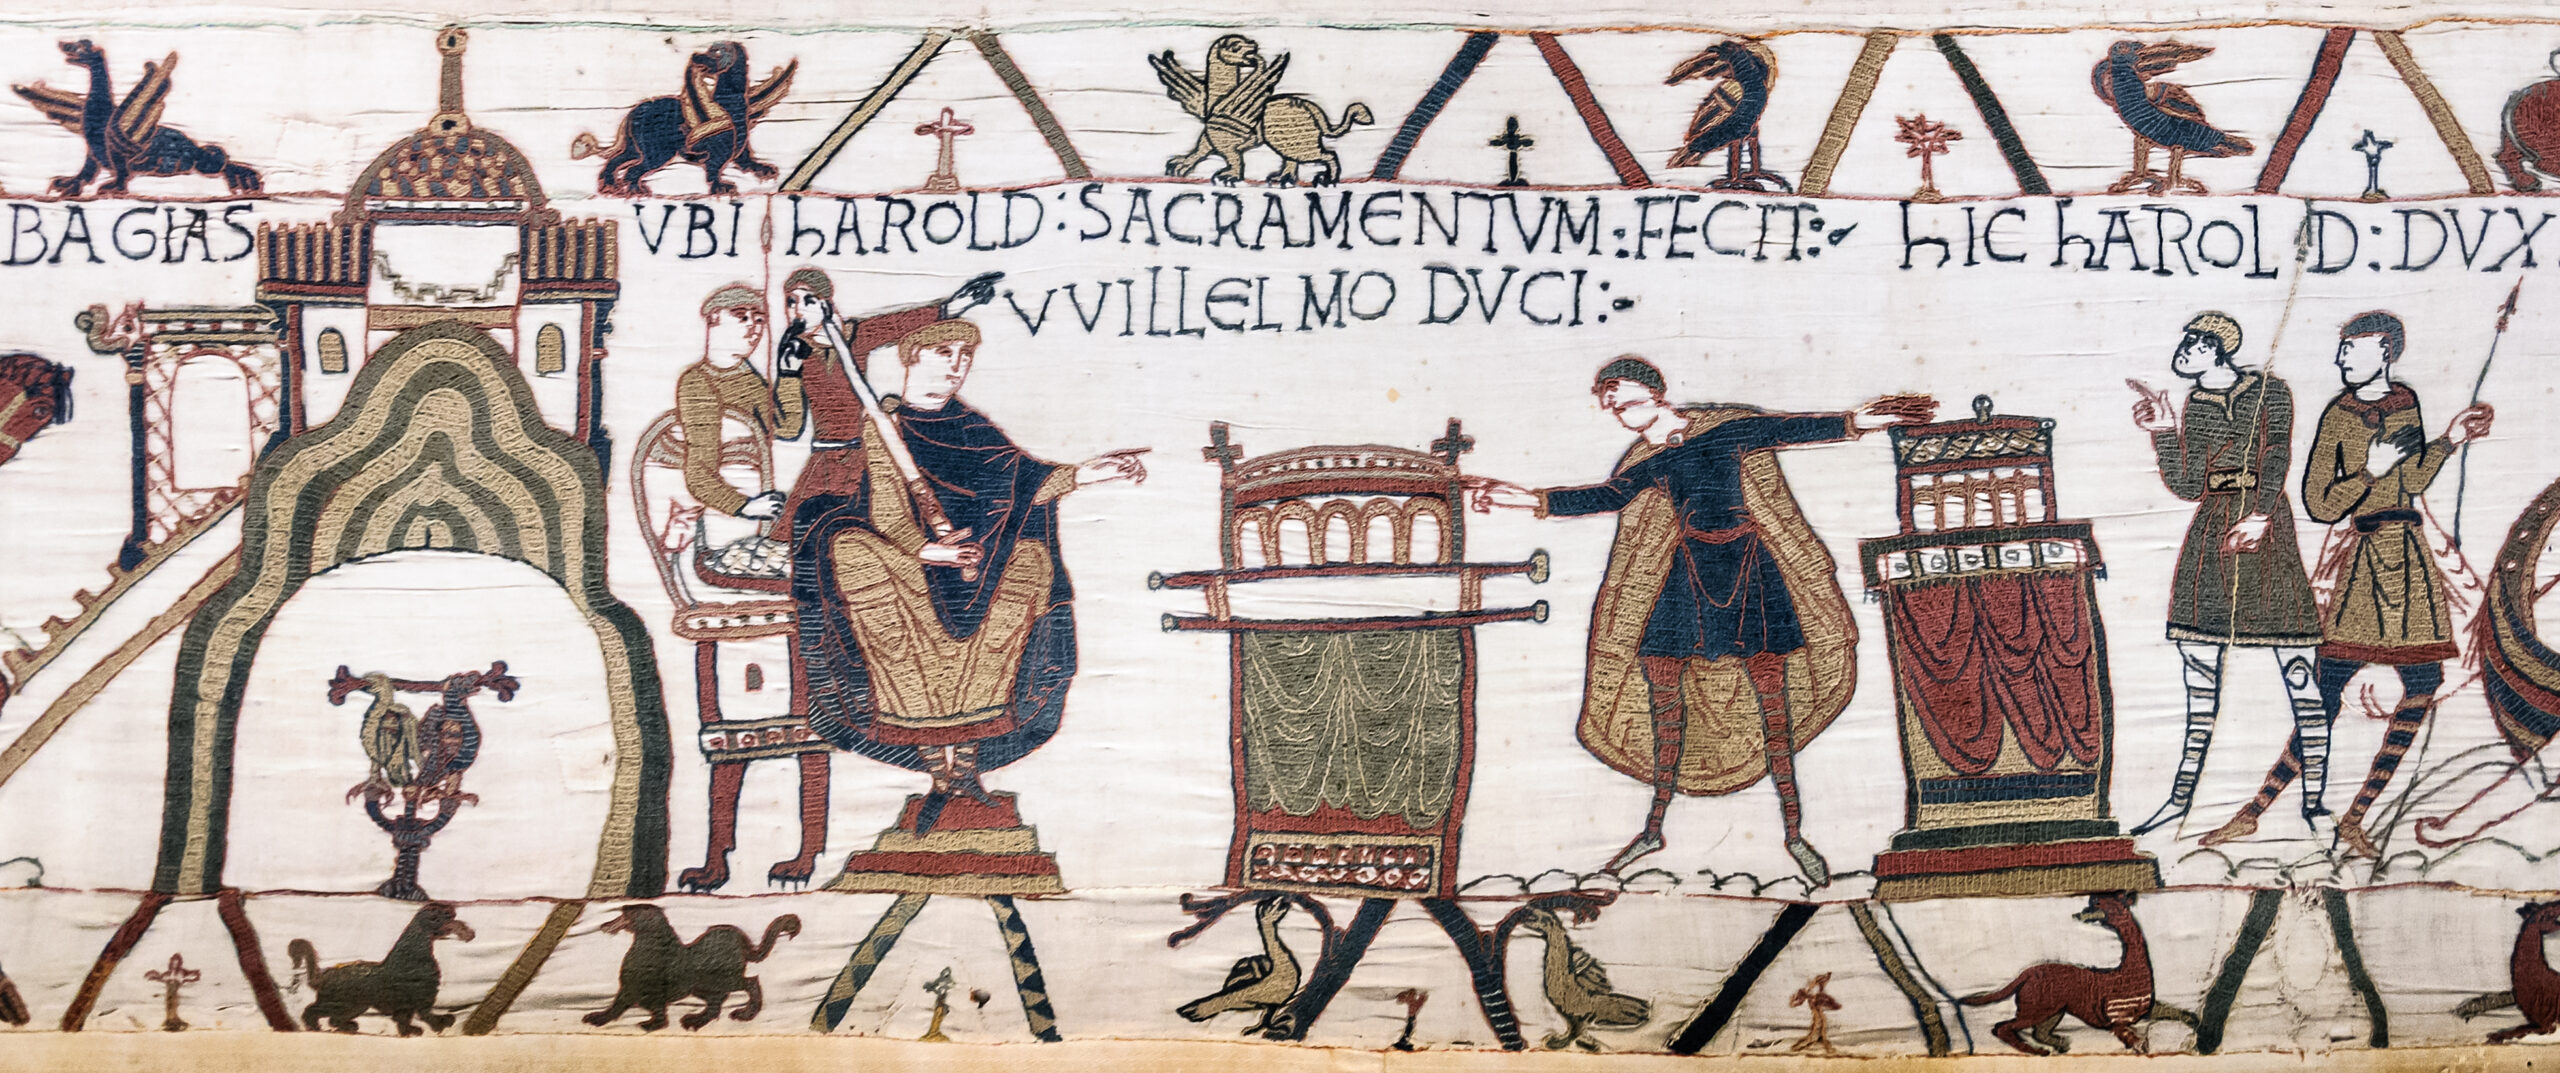 Bayeux tapestry depecting Harold oath